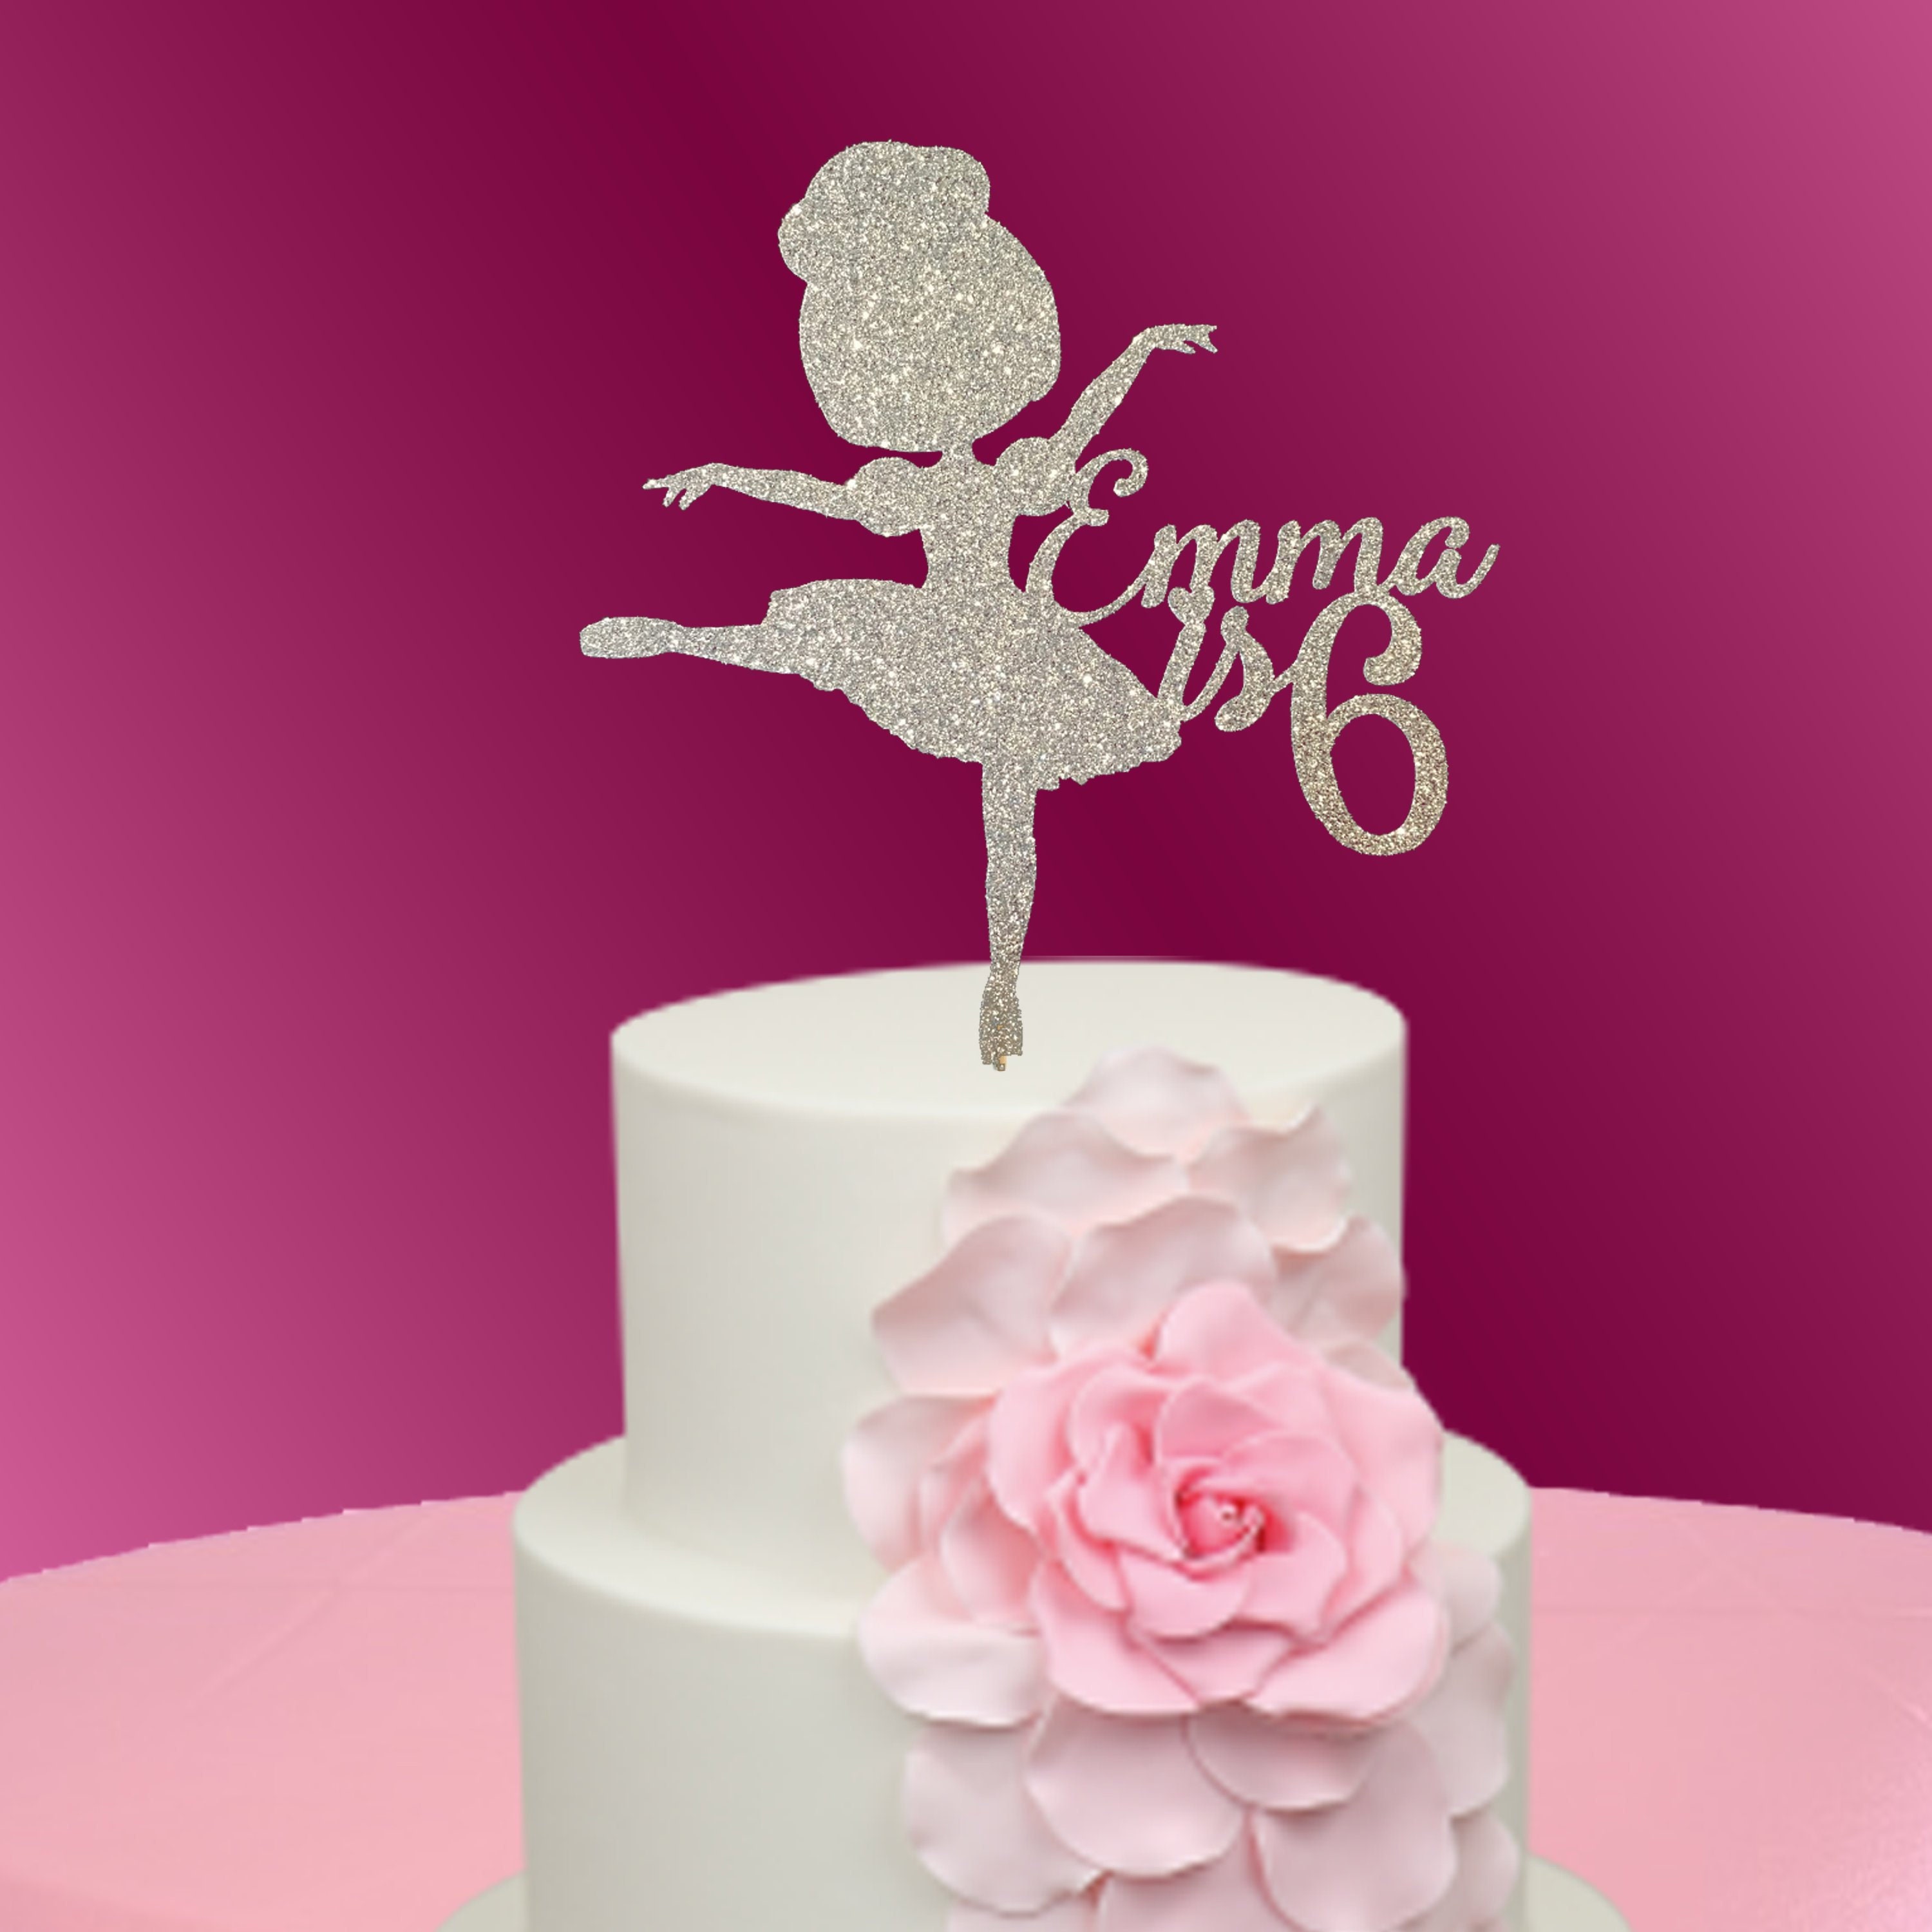 Dance Edible Cake Topper Image – A Birthday Place